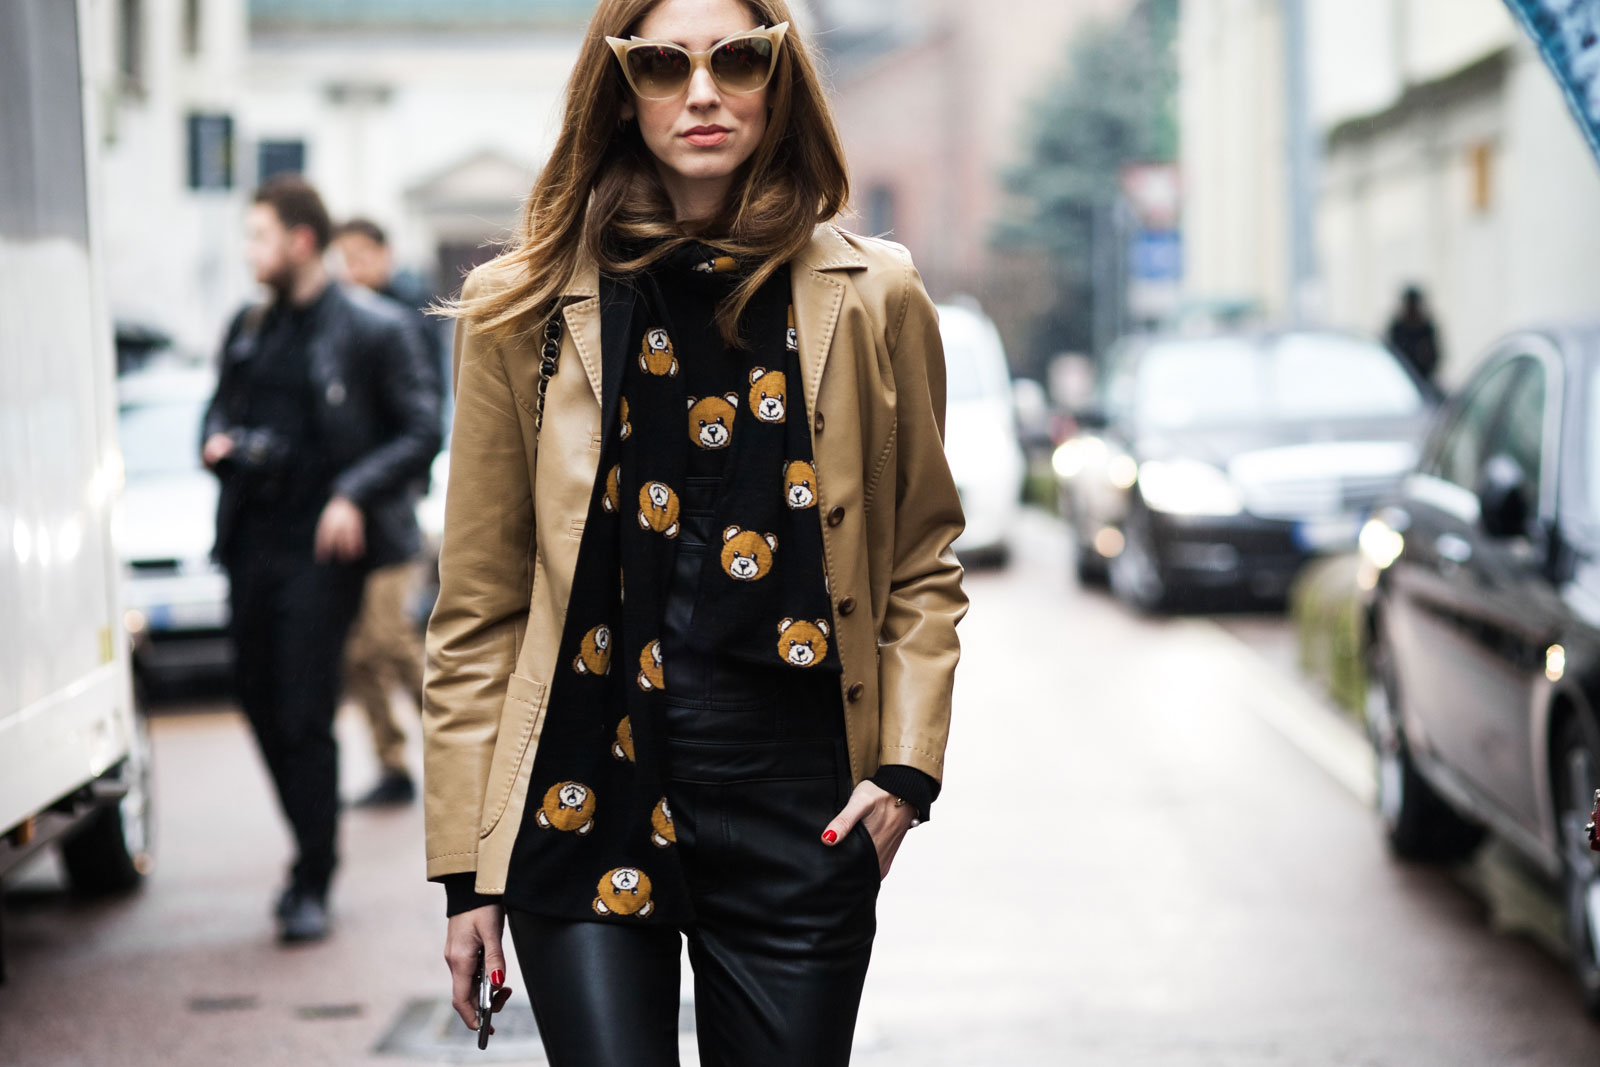 Chiara Ferragni wearing a vintage leather jacket, Moschino bear-print sweater and scarf, Black Orchid leather overalls, Céline shoes, Dita Eyewear sunglasses and Prada backpack before the Dsquared2 Fall/Winter 2015-2016 fashion show in Milan, Italy